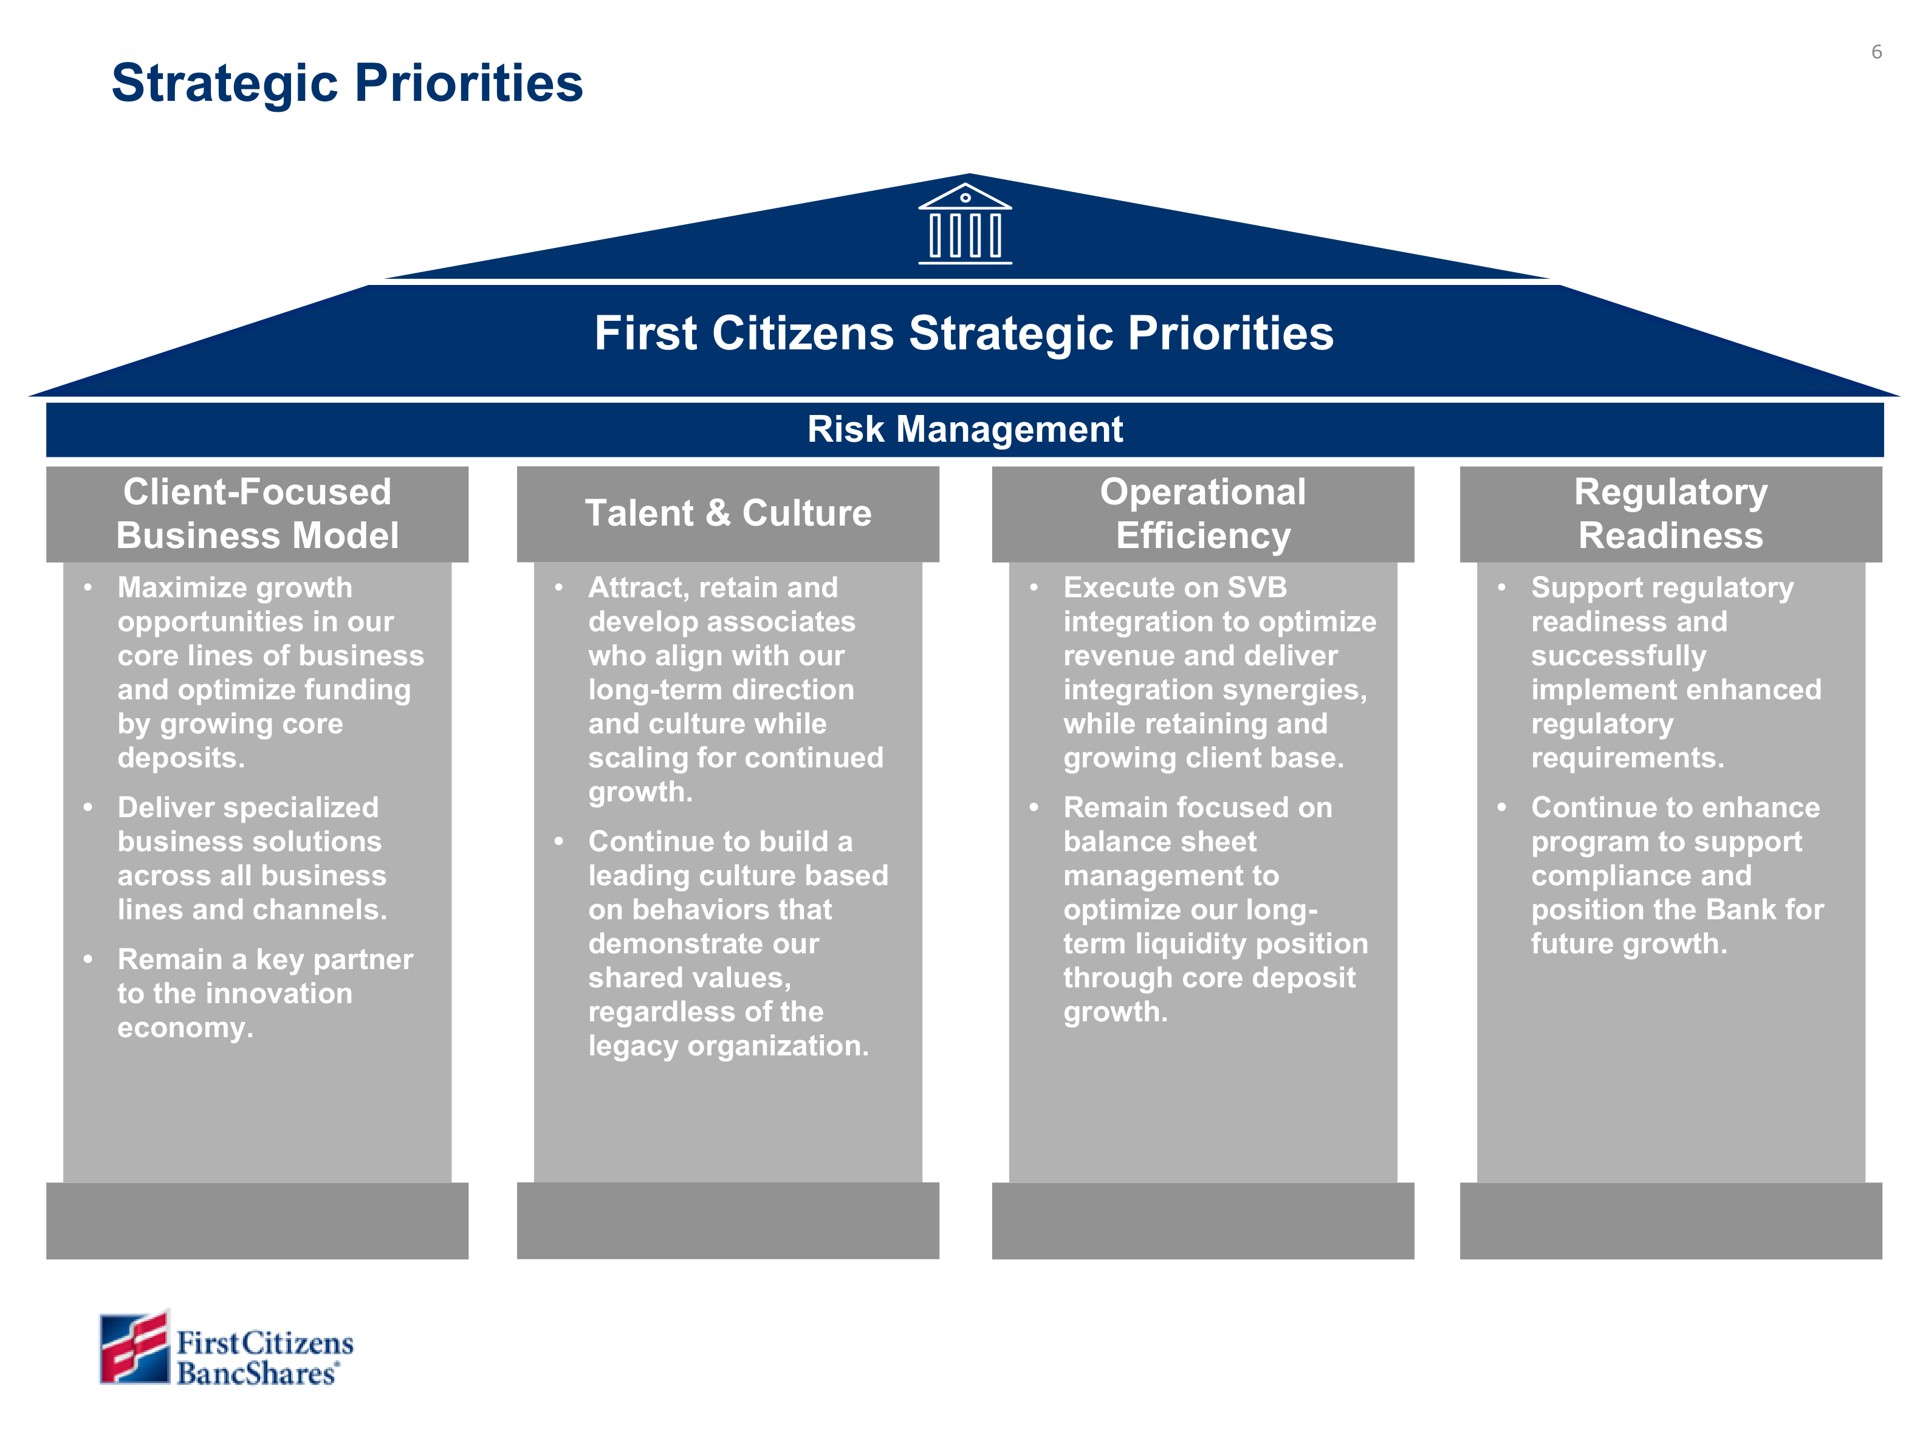 strategic priorities first citizens strategic priorities risk management client focused business model talent culture operational efficiency regulatory readiness | First Citizens BancShares